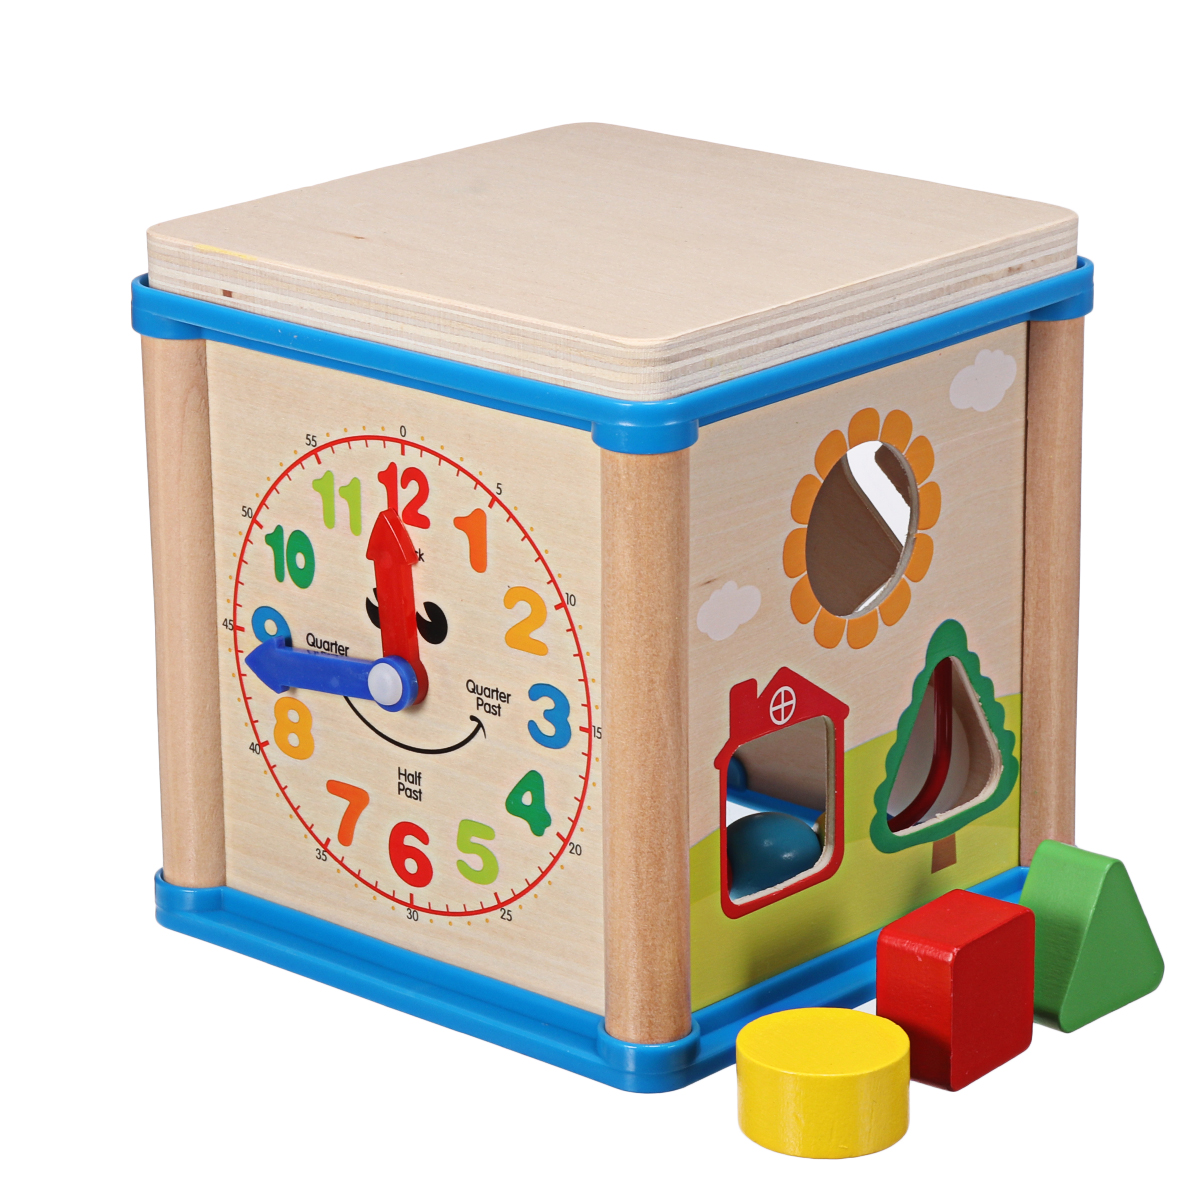 Wooden-Multi-functional-Wisdom-Aroind-Treasure-Box-with-Beads-Parent-child-Educational-Learning-Toy--1733559-6